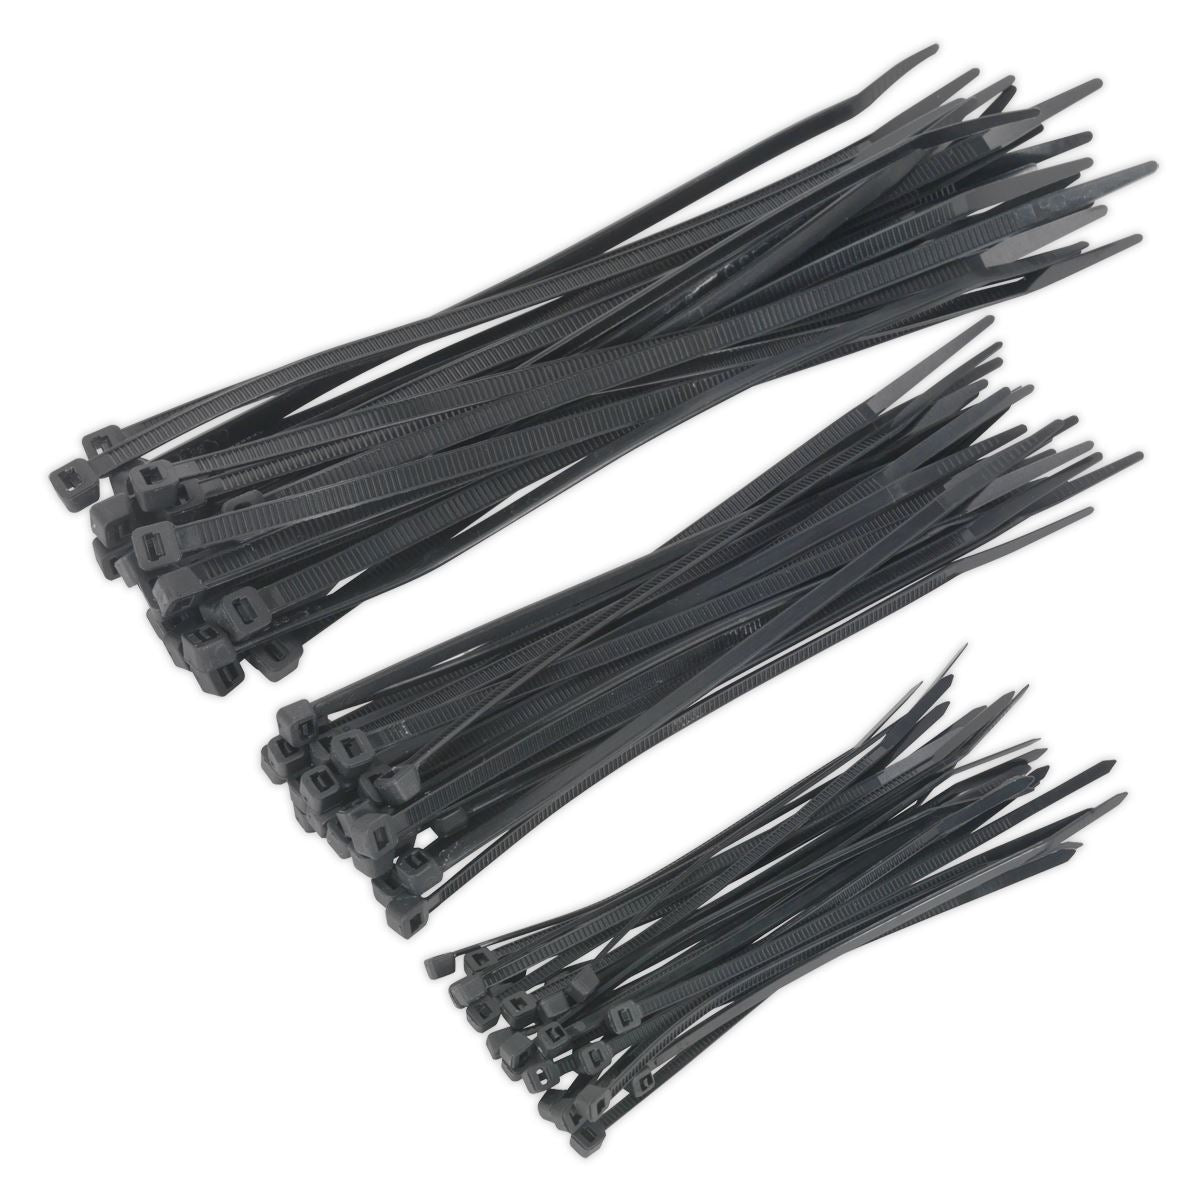 Sealey Cable Tie Assortment Black Pack of 75